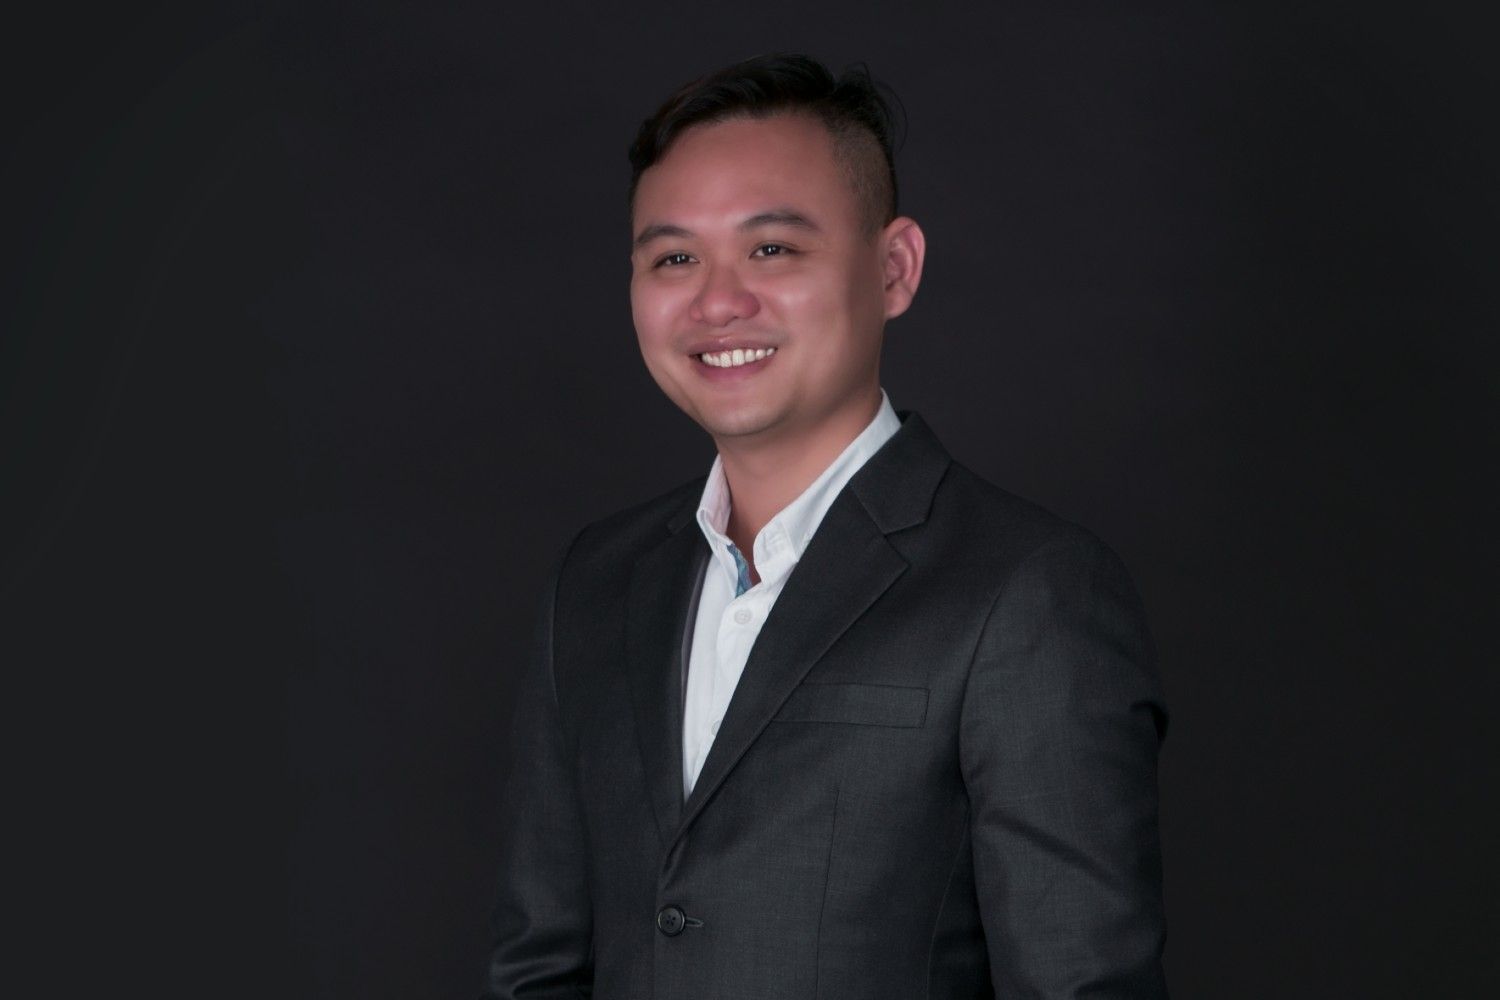 WE! Interactive's Matthew Lim gives free consulting to struggling brands during the pandemic